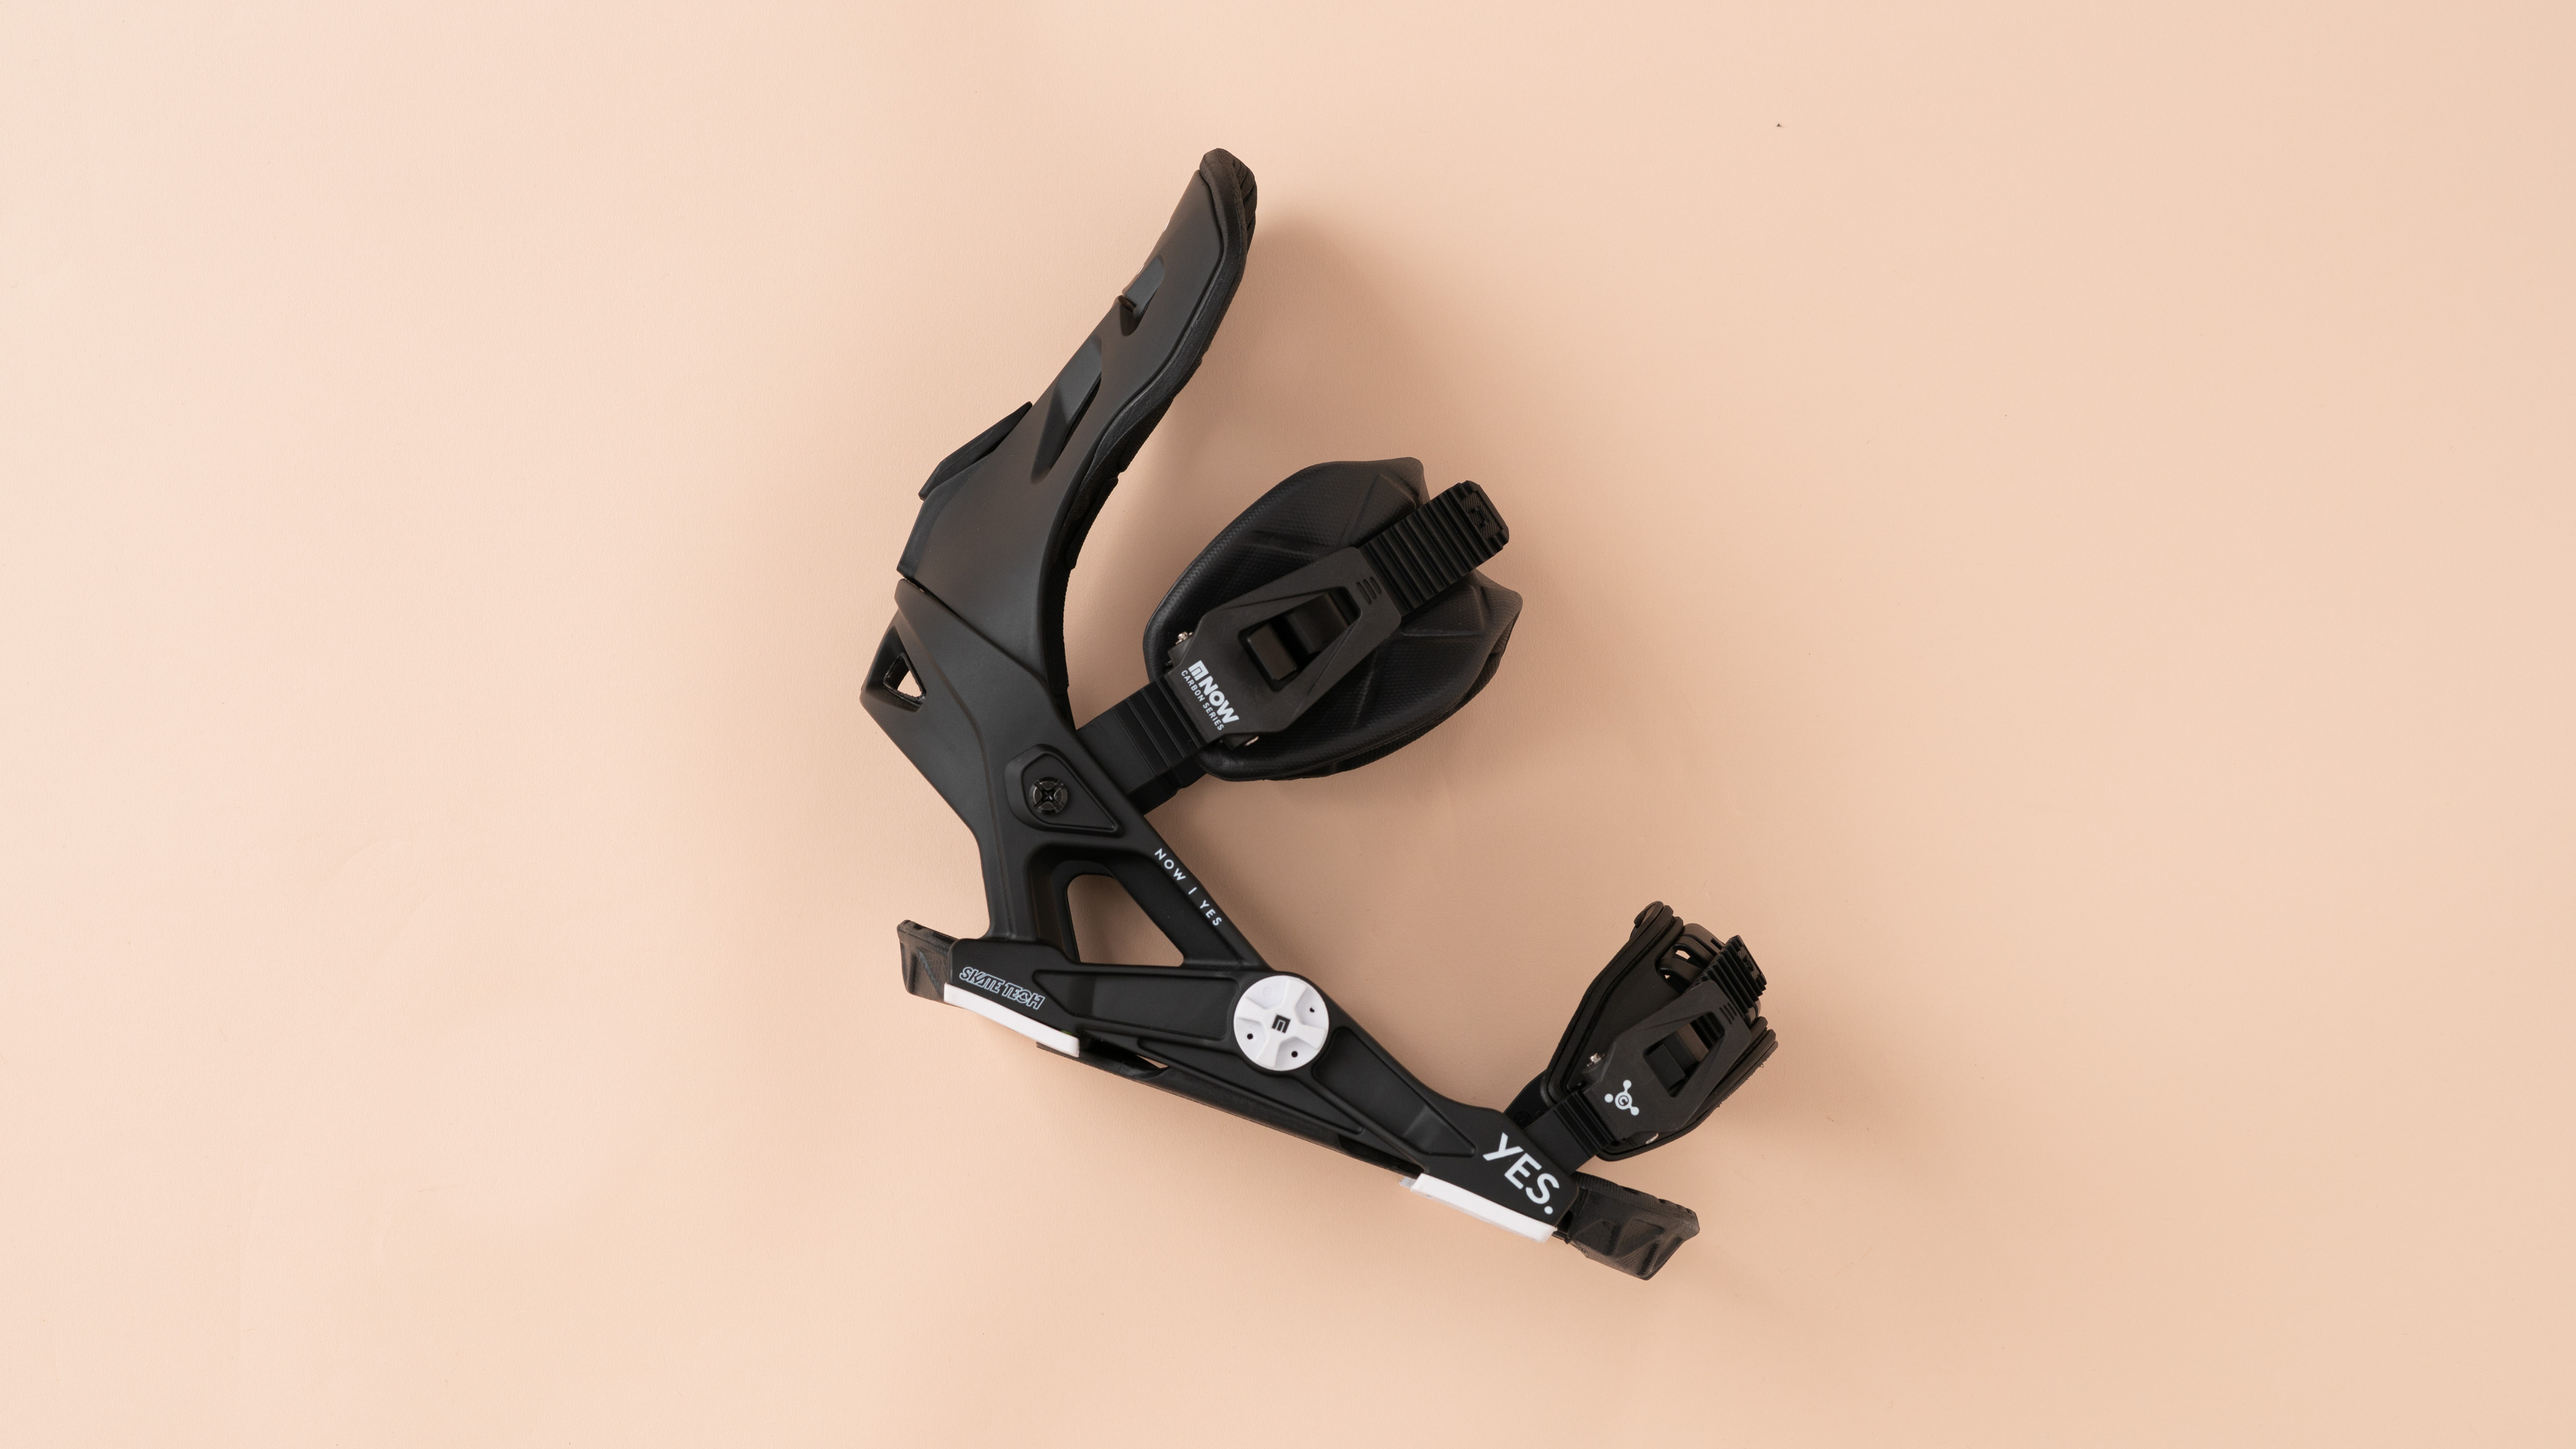 NOW x YES 2020-2021 Snowboard Bindings Review - Whit